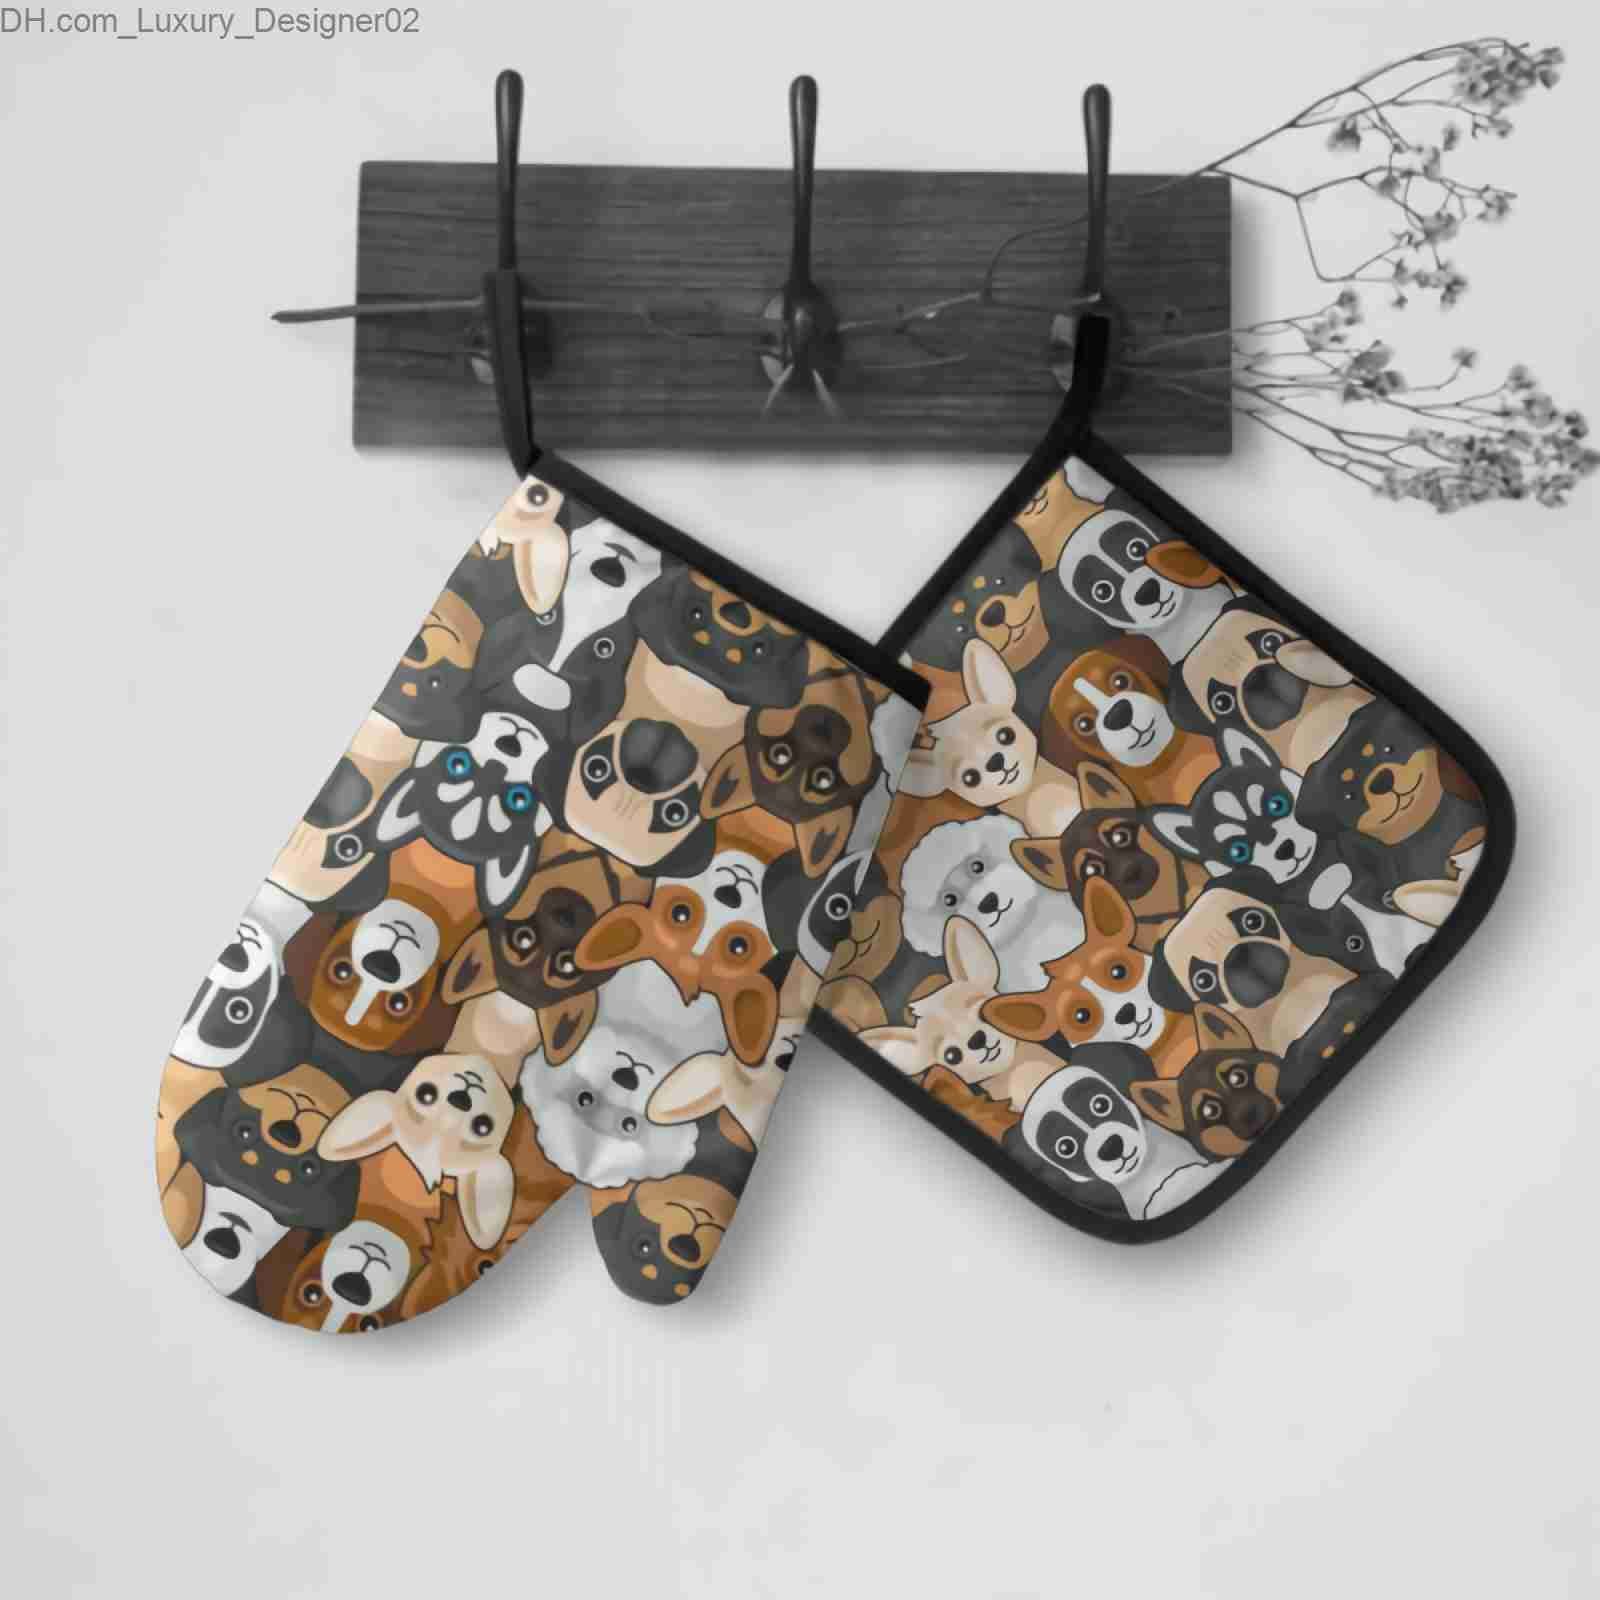 Cute Corgi Dog Heat Resistant Oven Mitts and Pot Holders Sets Non Slip  Kitchen Gloves Hot Pads with Inner Cotton Layer for Cooking BBQ Baking  Grilling